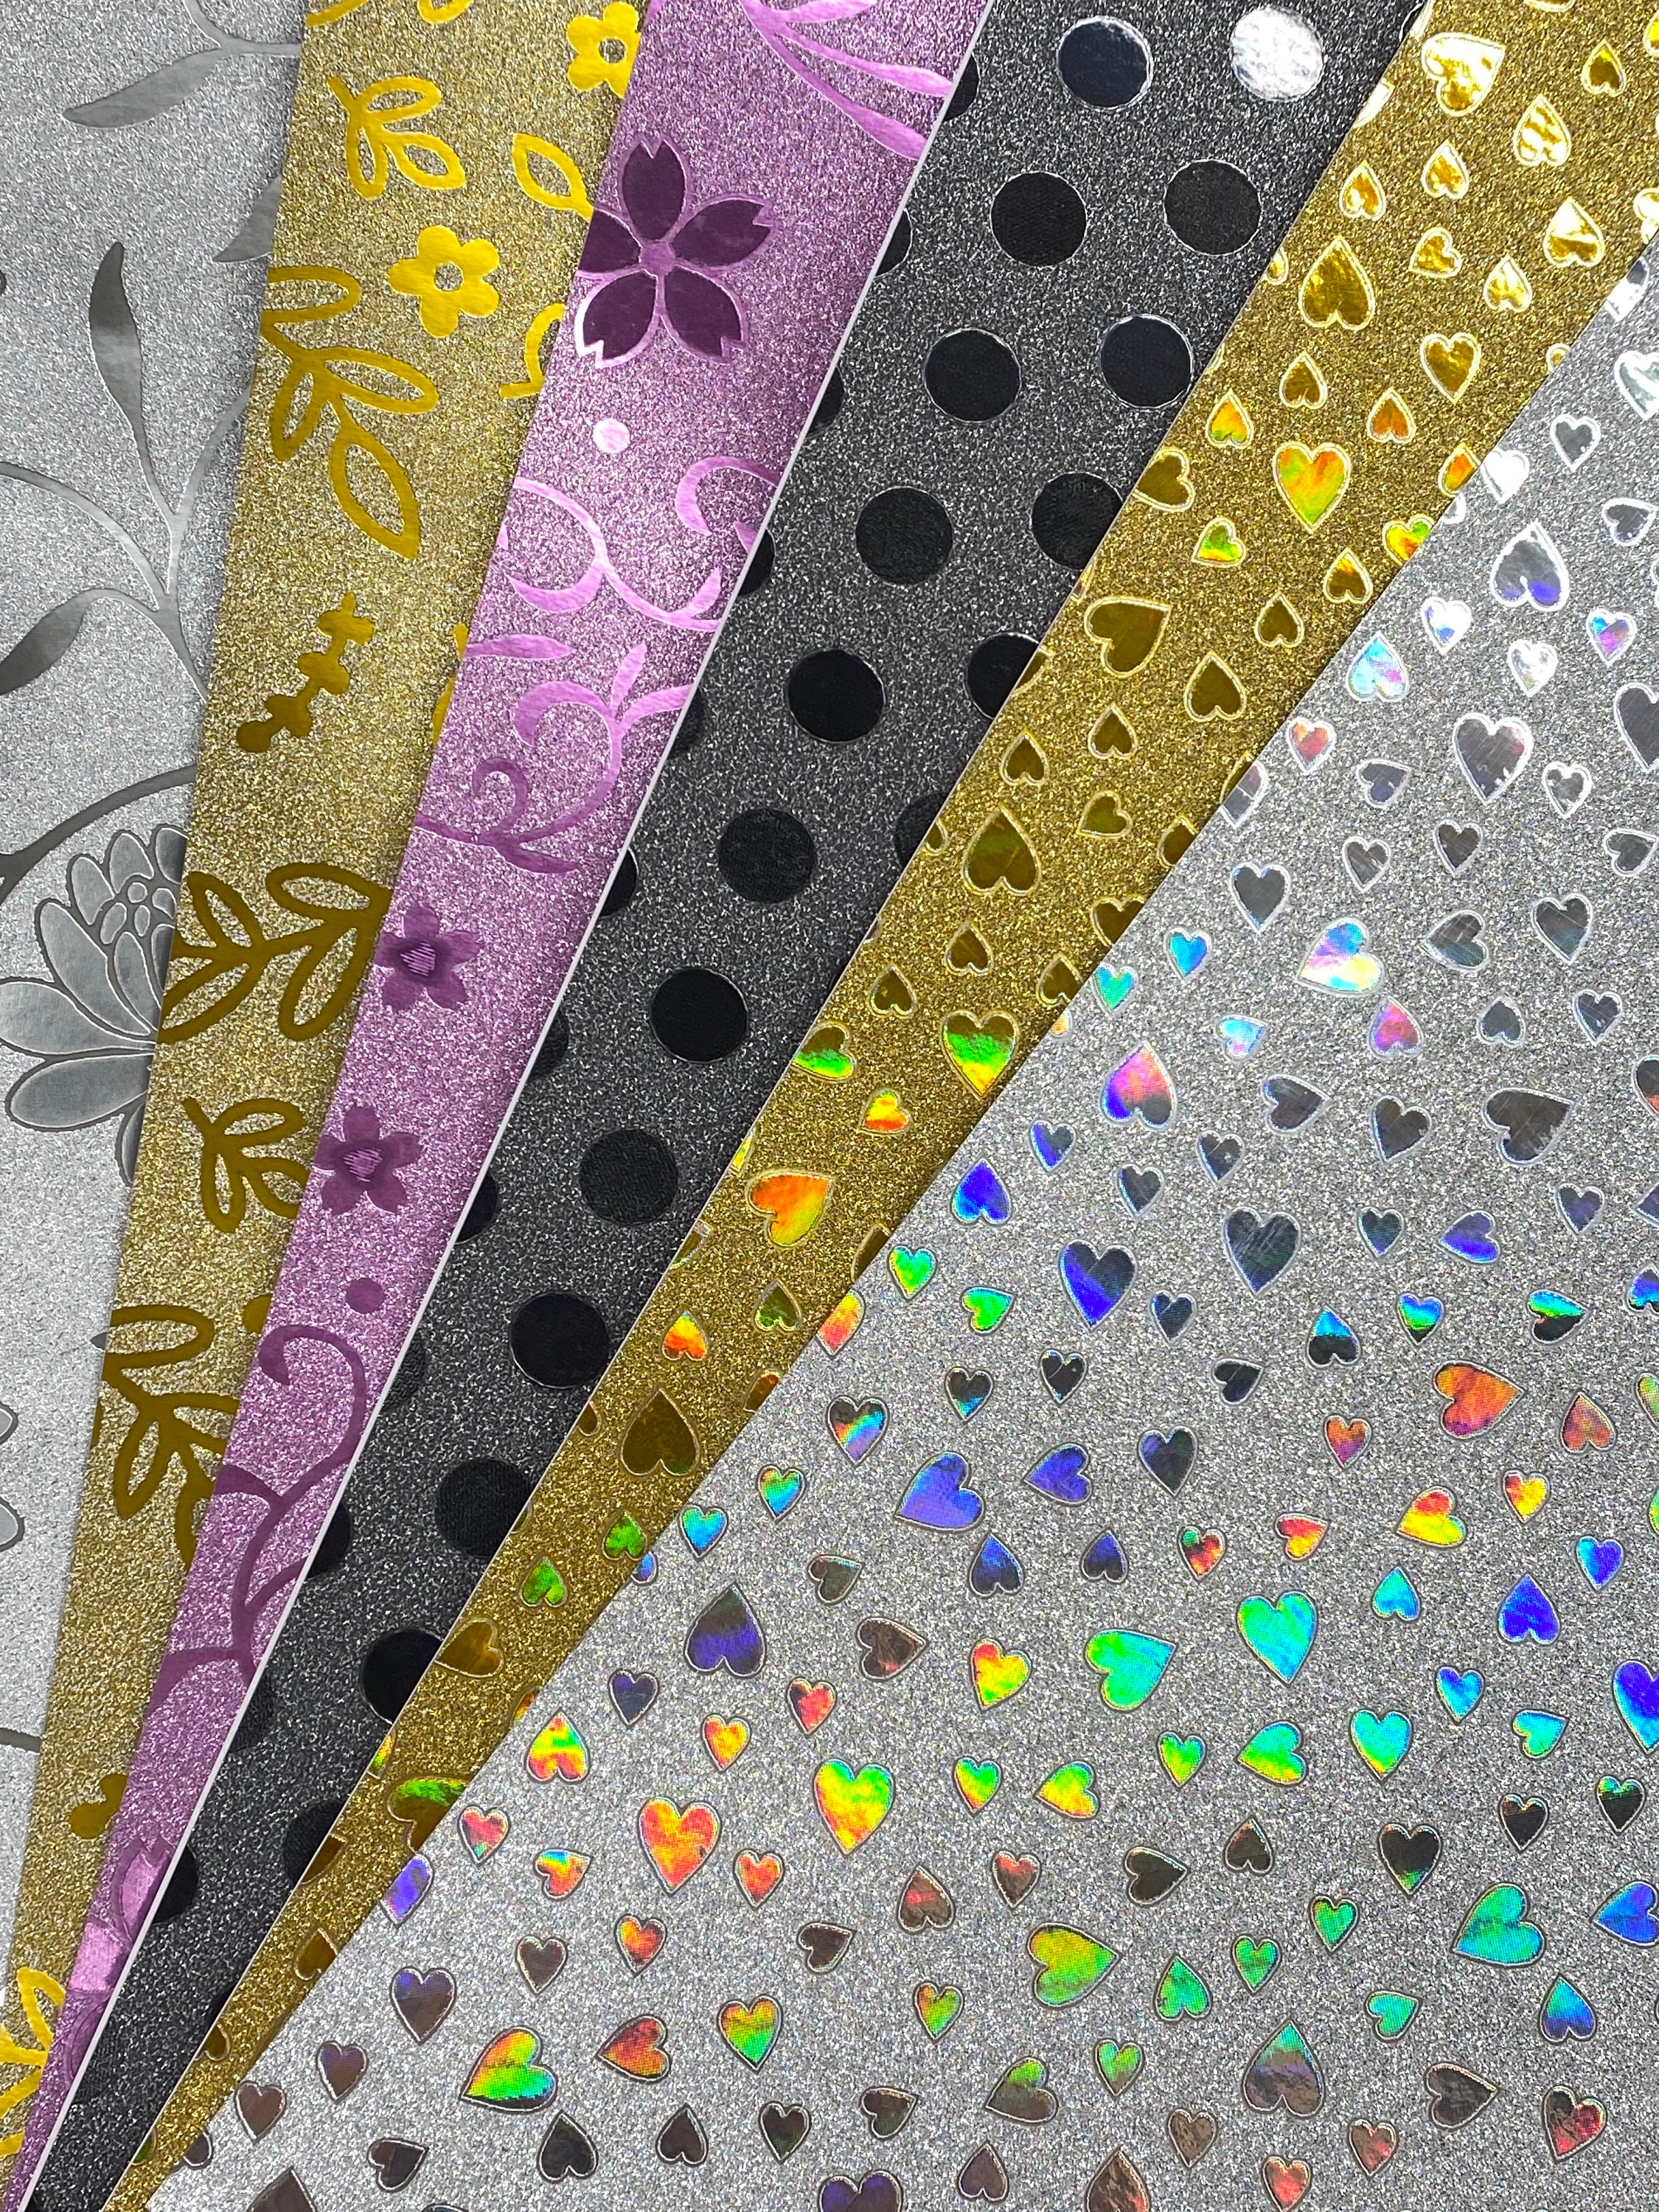 A4 dc fix Self-adhesive Vinyl Sheets Craft Pack - GLITTER SILVER